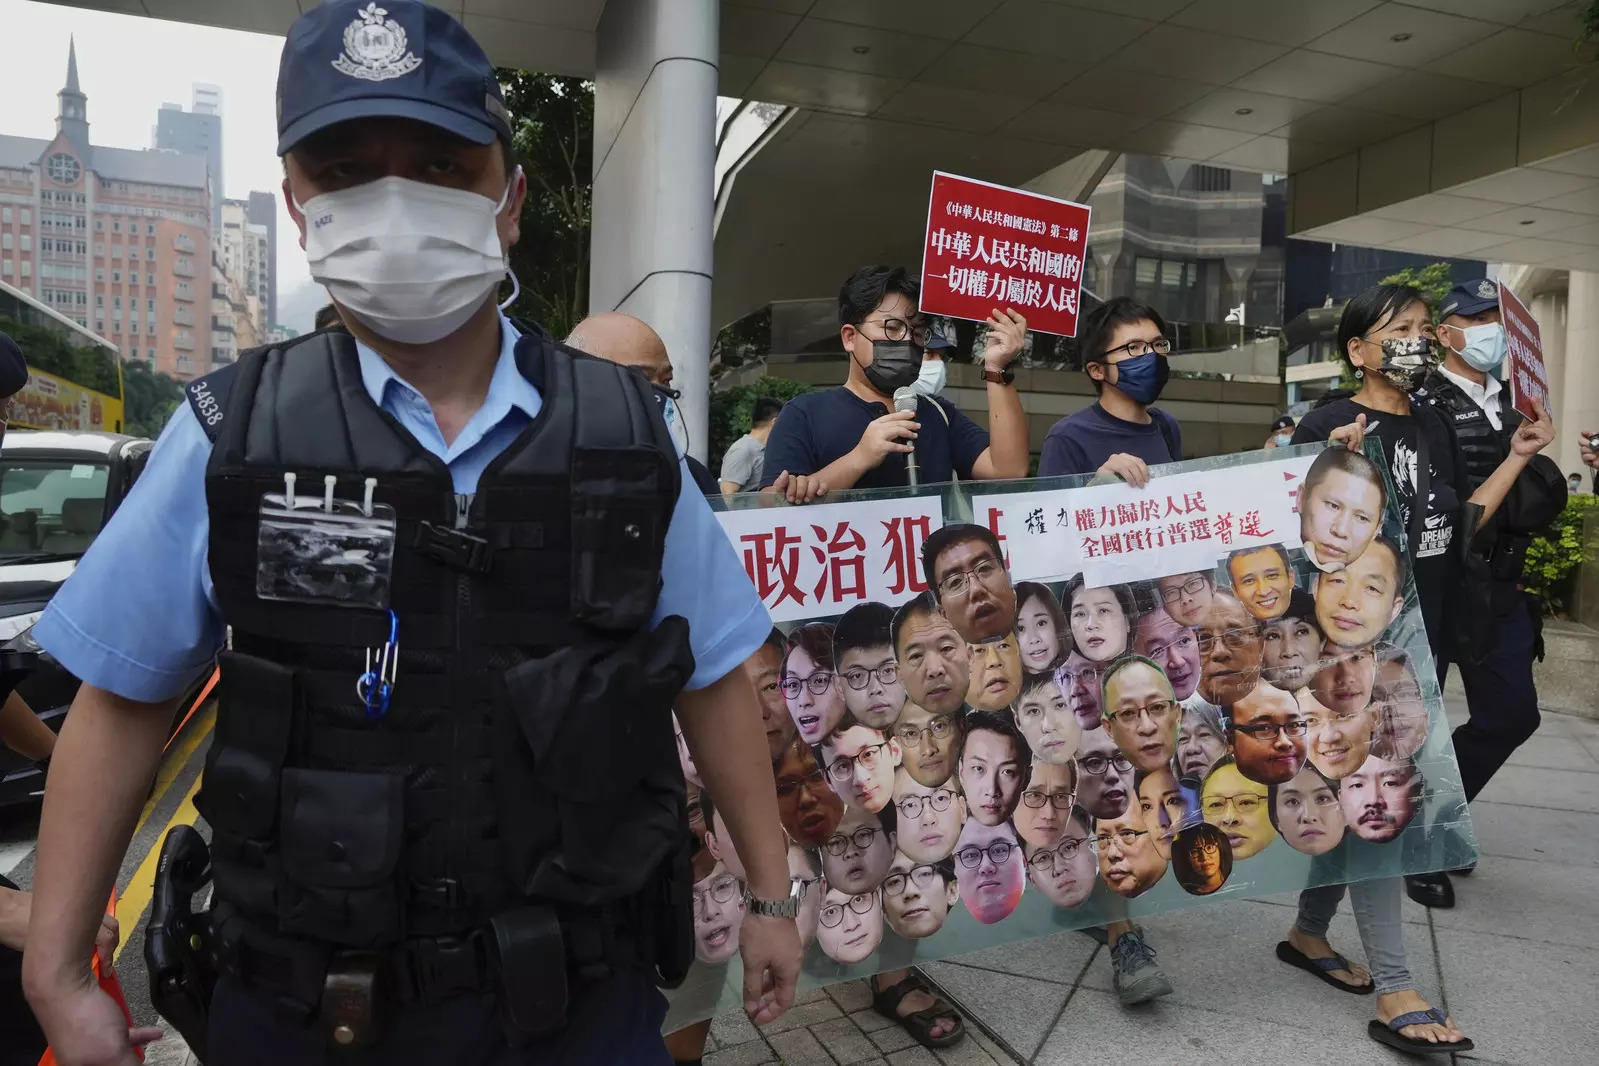 File photo: Pro-democracy protesters march beside a police officer in Hong Kong.